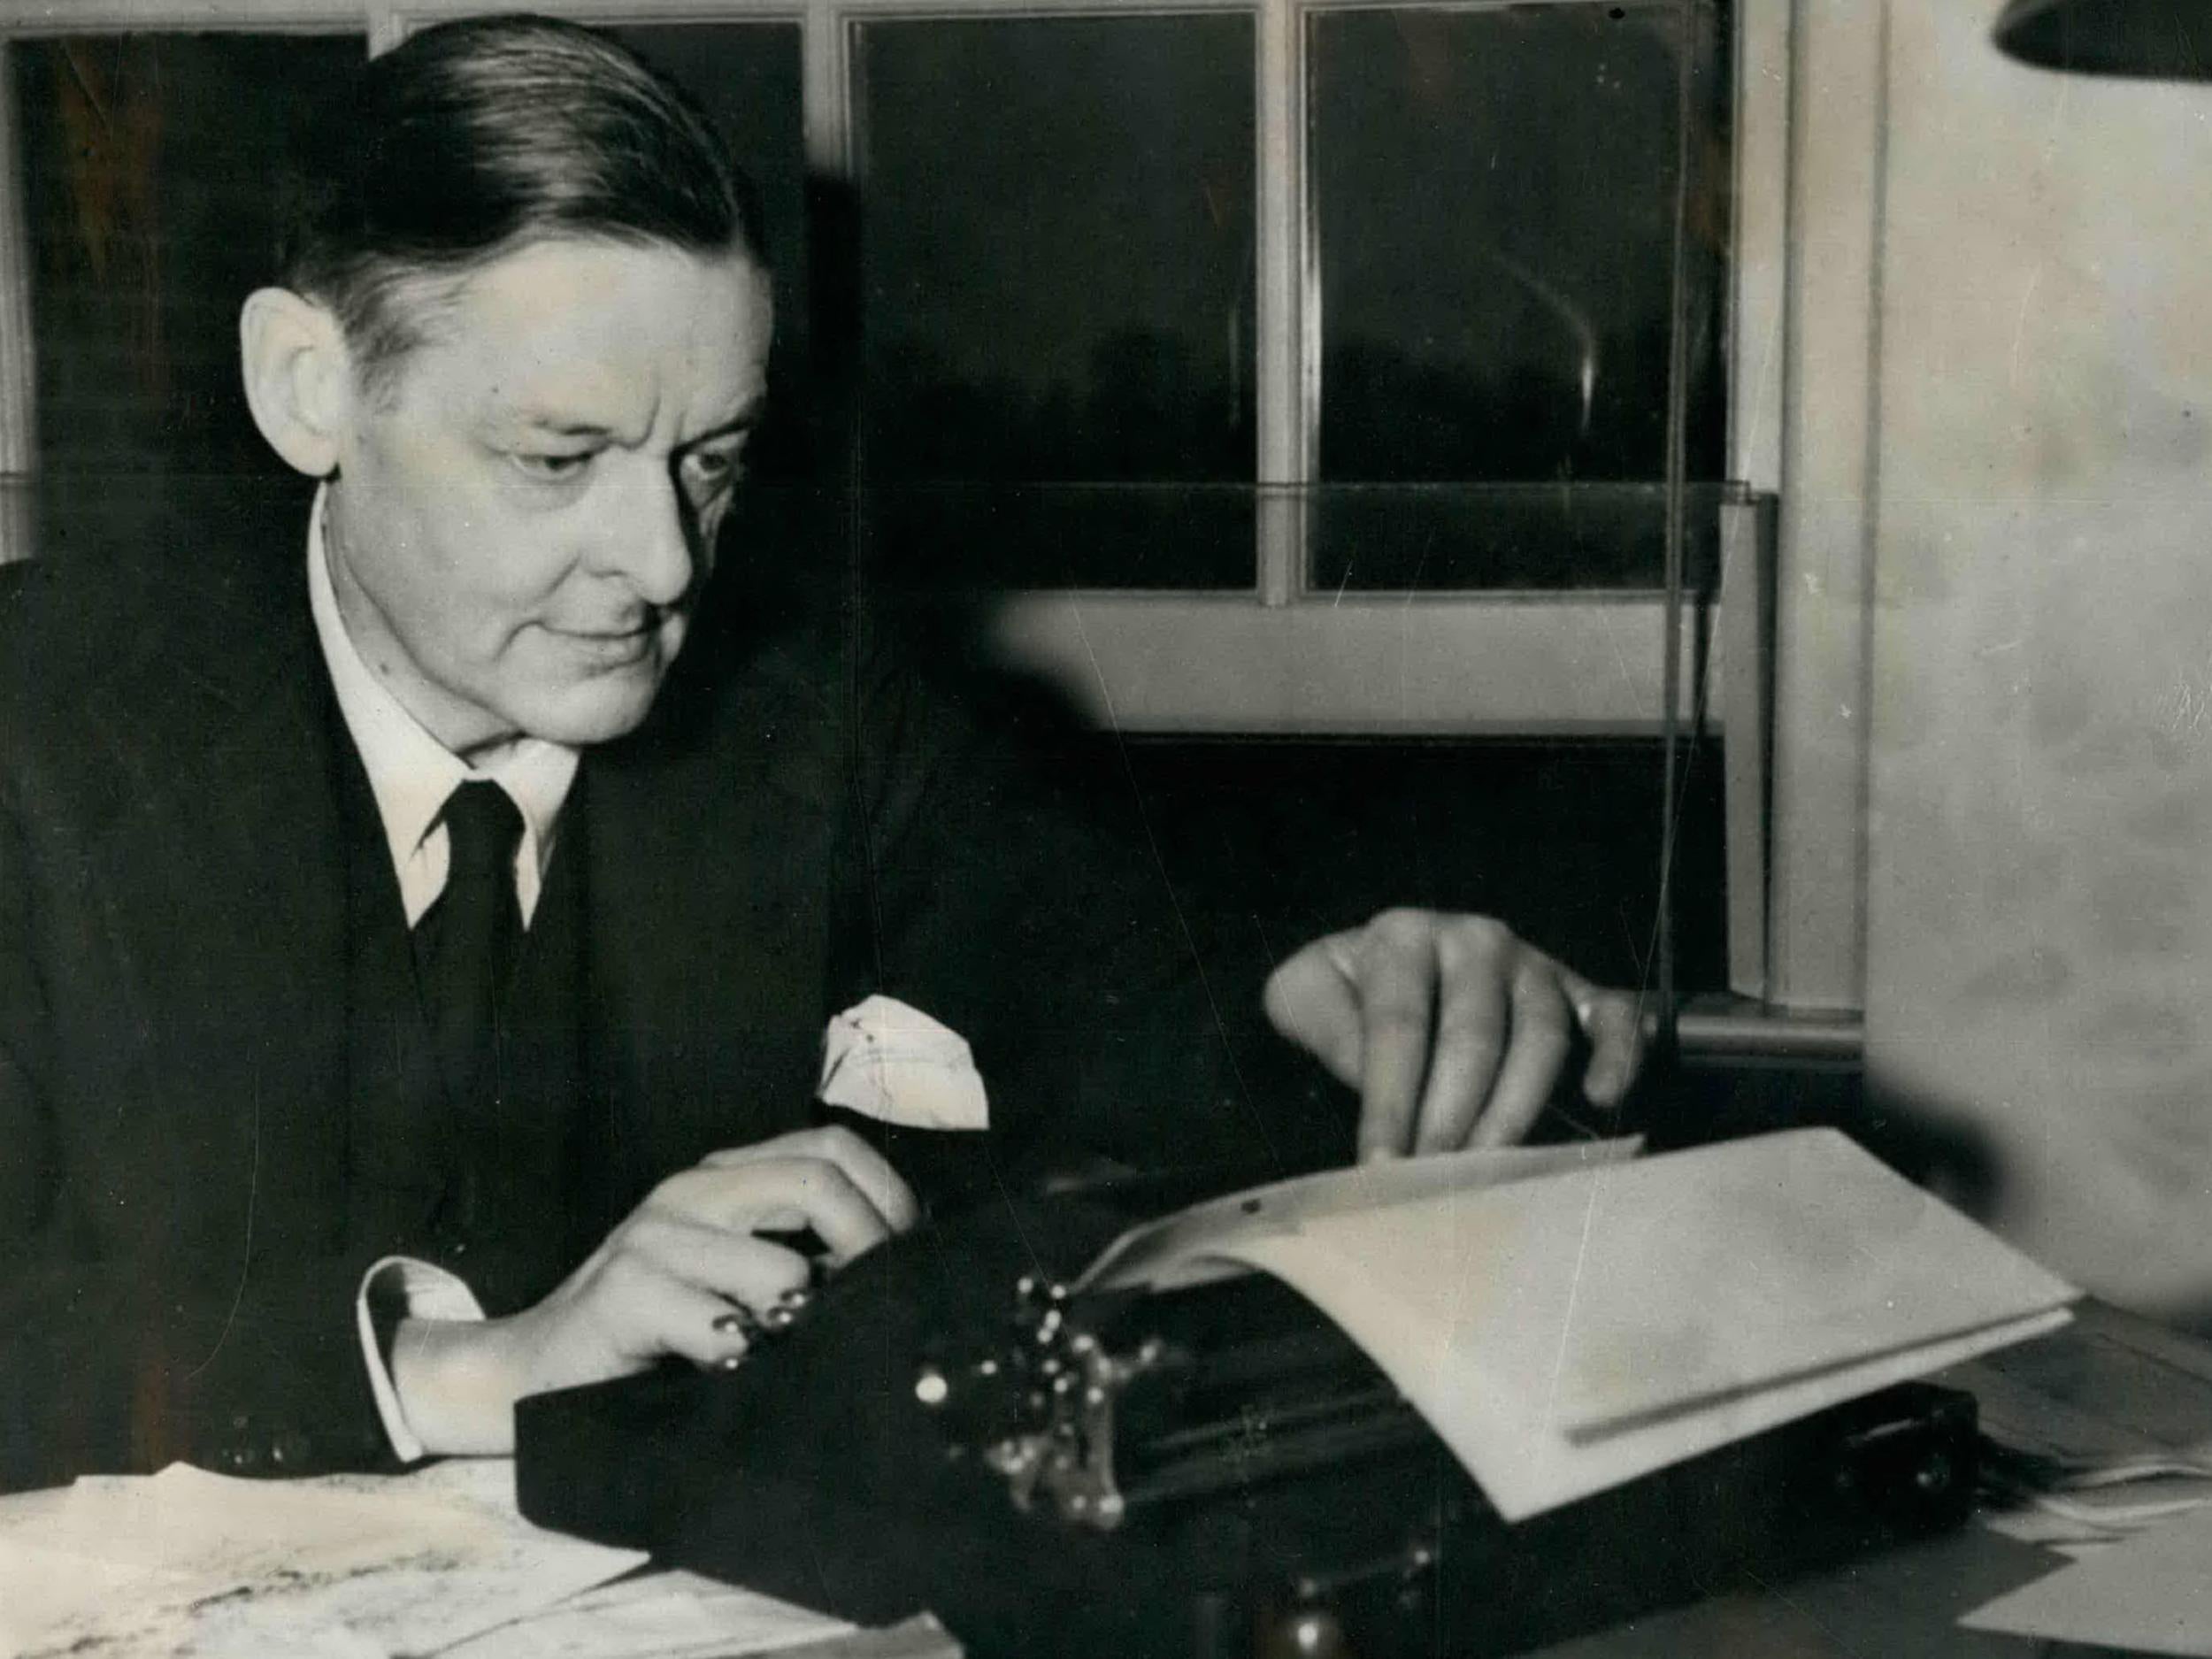 Eliot at Princeton, 1948: a reserved persona who was unlikely to bare his soul